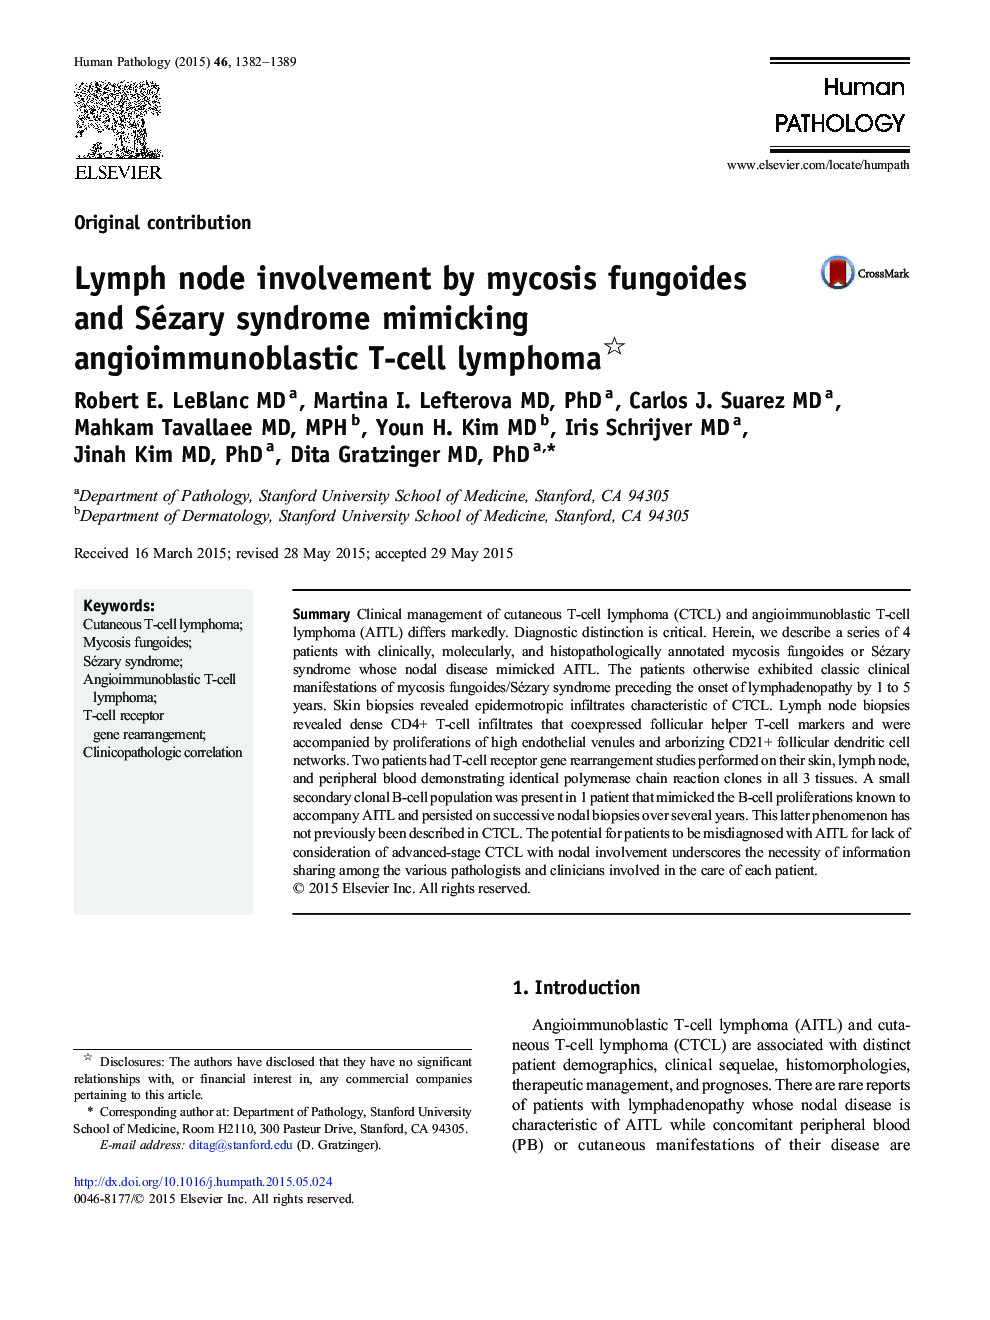 Lymph node involvement by mycosis fungoides and Sézary syndrome mimicking angioimmunoblastic T-cell lymphoma 